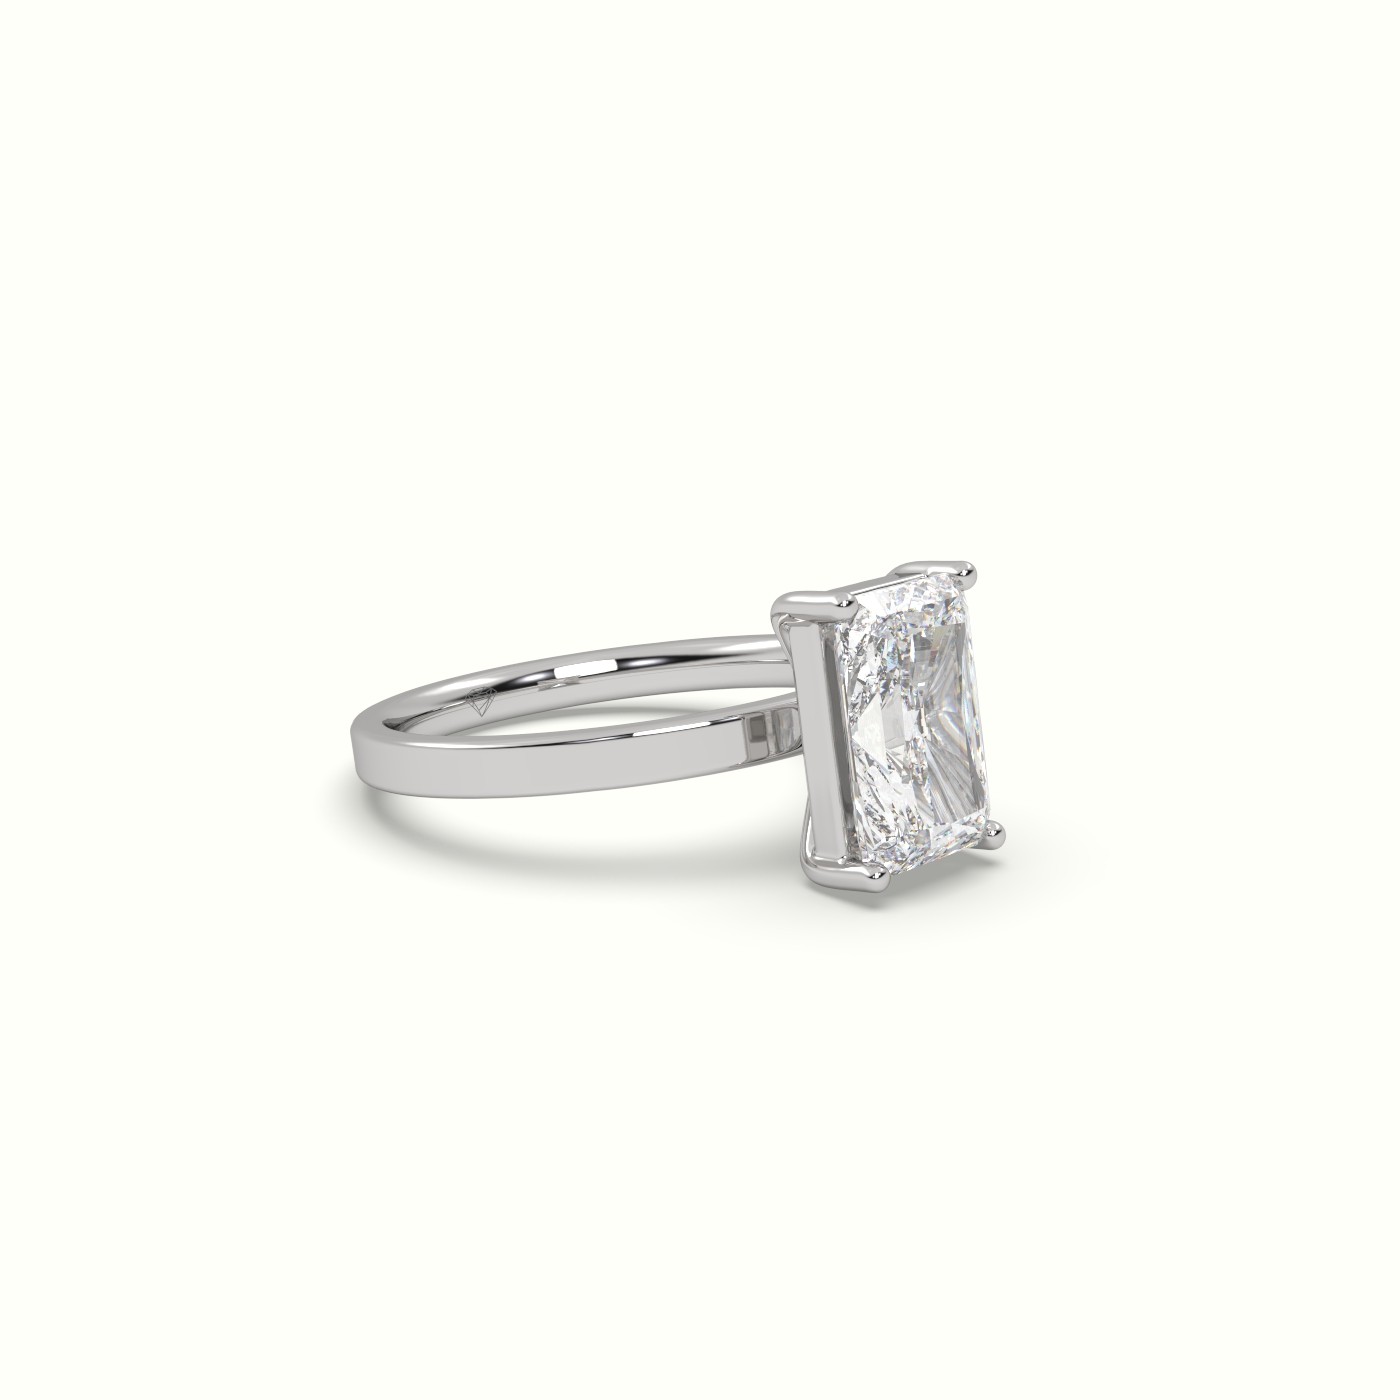 18K WHITE GOLD Radiant Cut Solitaire Diamond Ring Precious Jewels Antwerp Radiance